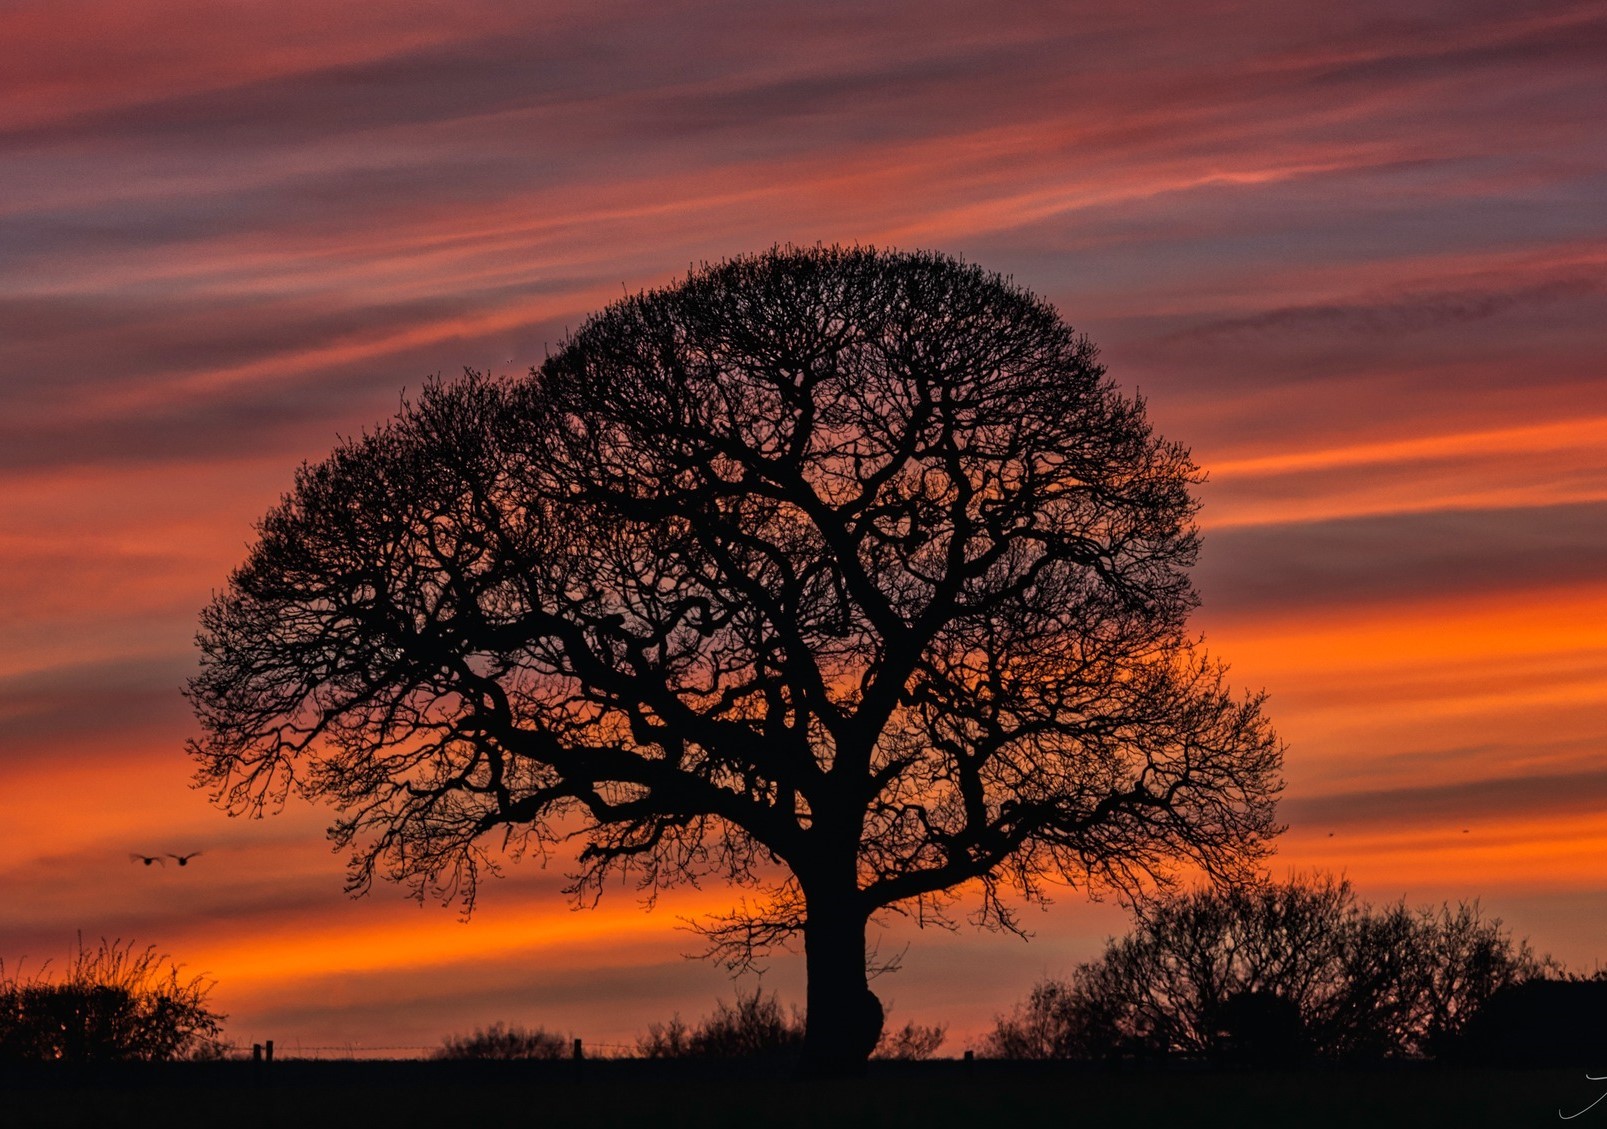 A winters sunset by Alan Bailey